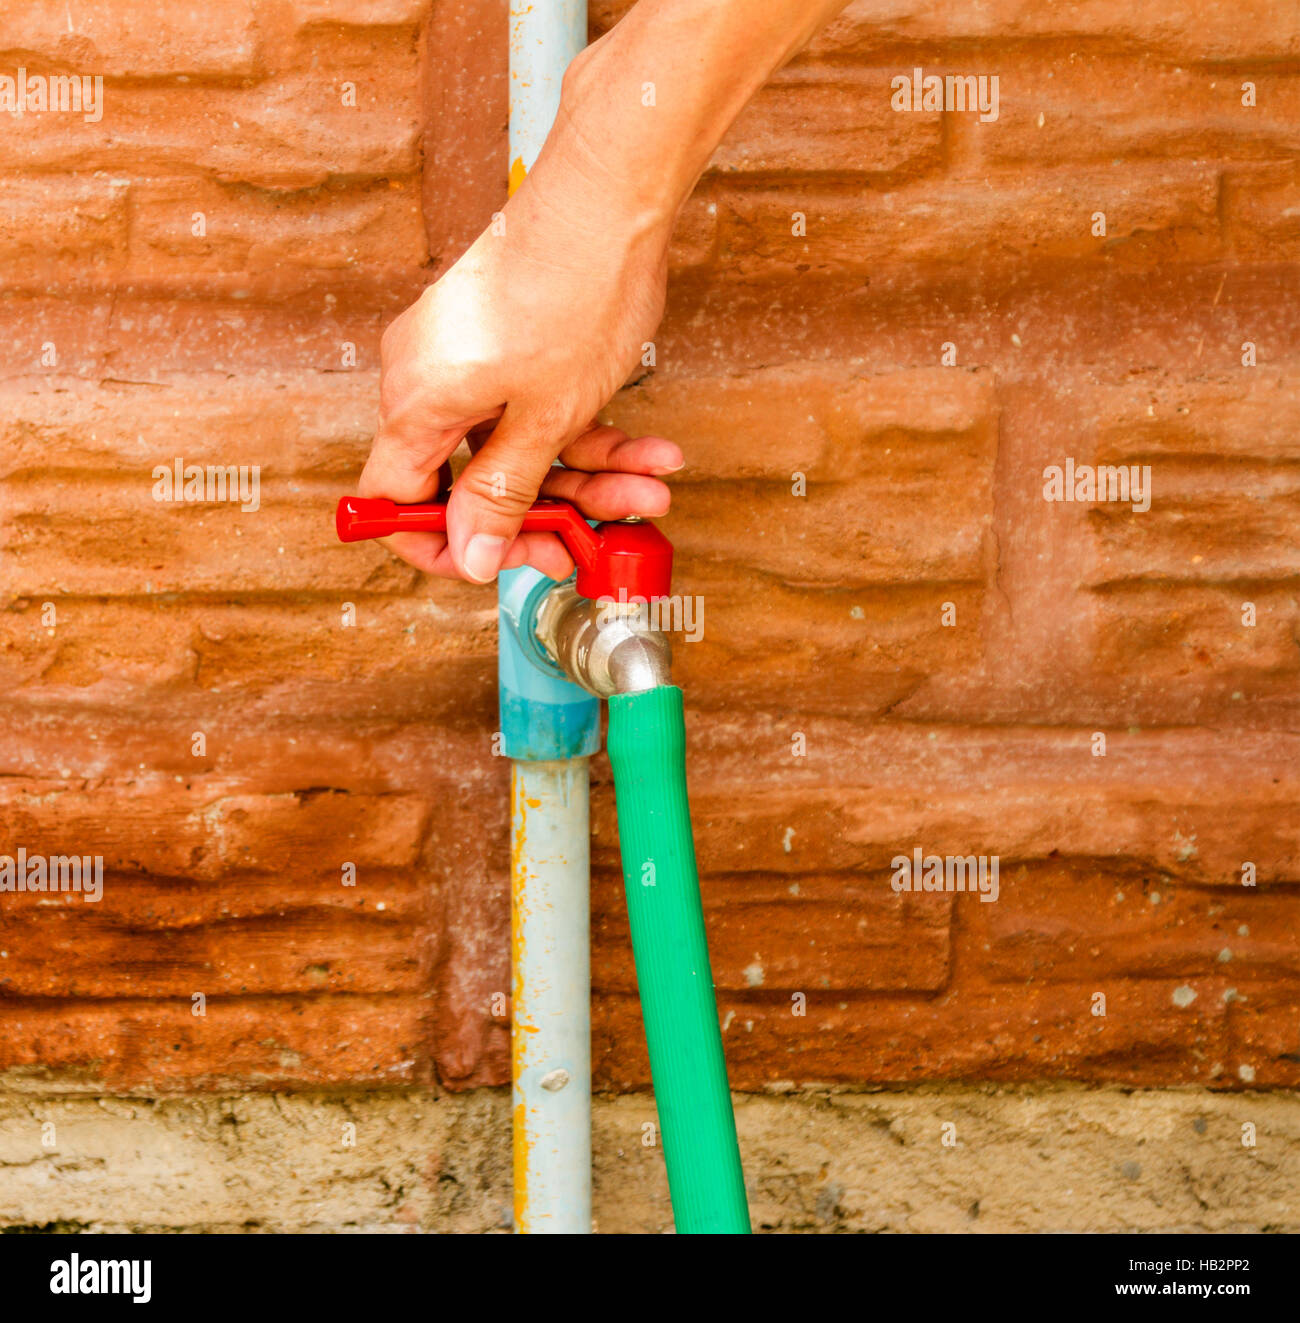 Wasting water in the garden on hand. Stock Photo